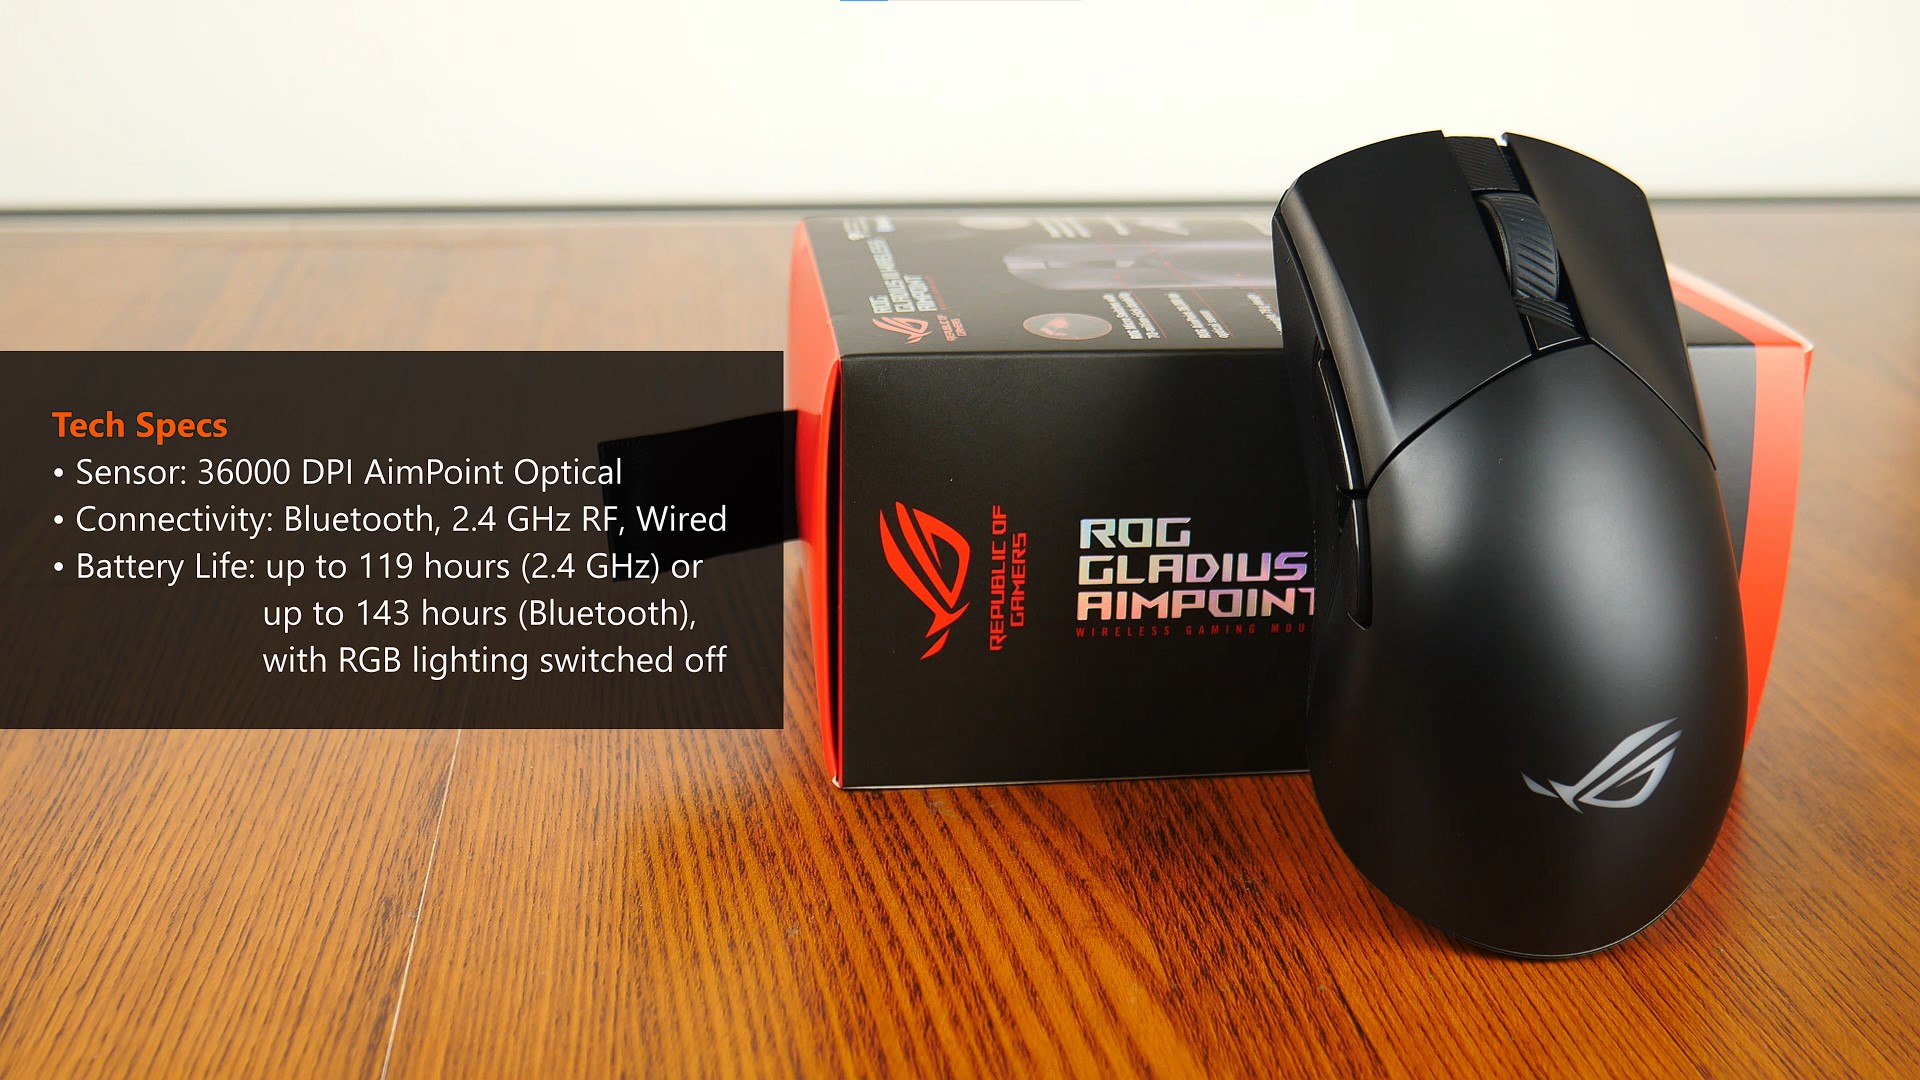 ASUS Optical Gaming Mouse - ROG Gladius II Core | Ergonomic Right-hand Grip  | Lightweight PC Gaming Mouse | 6200 DPI Optical Sensor | Omron Switches 